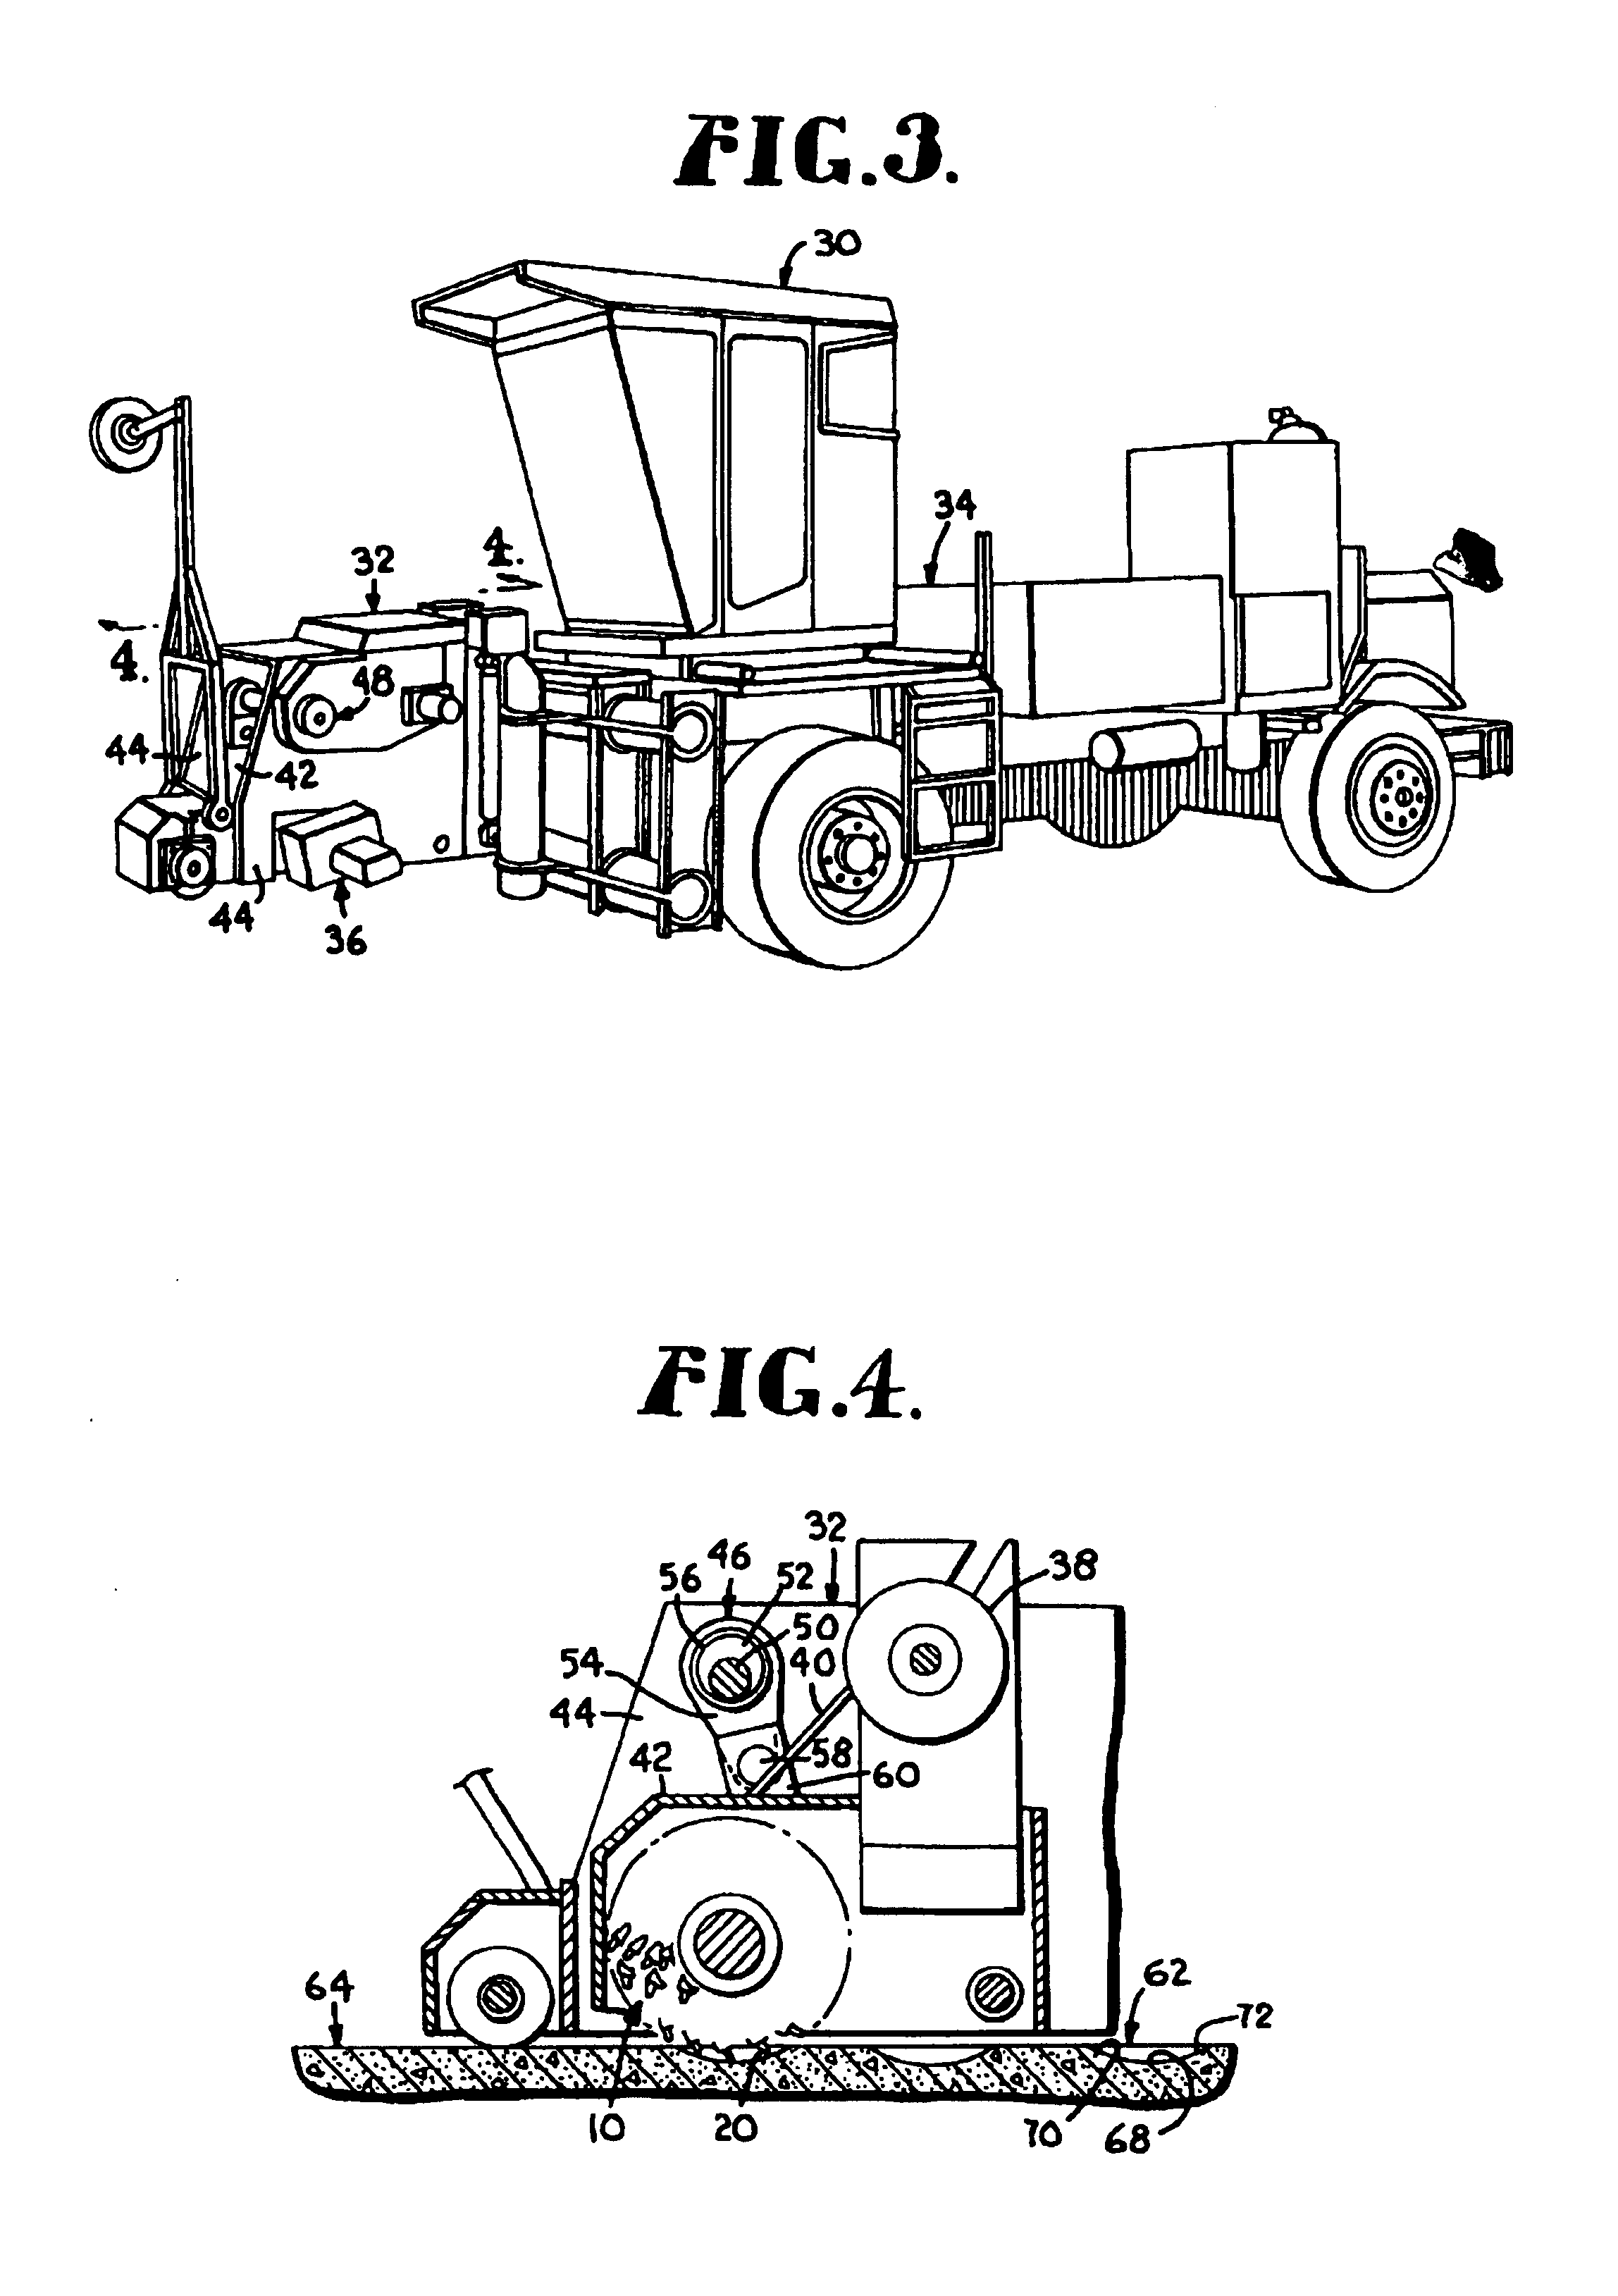 Apparatus for cutting rumble strips in a road surface